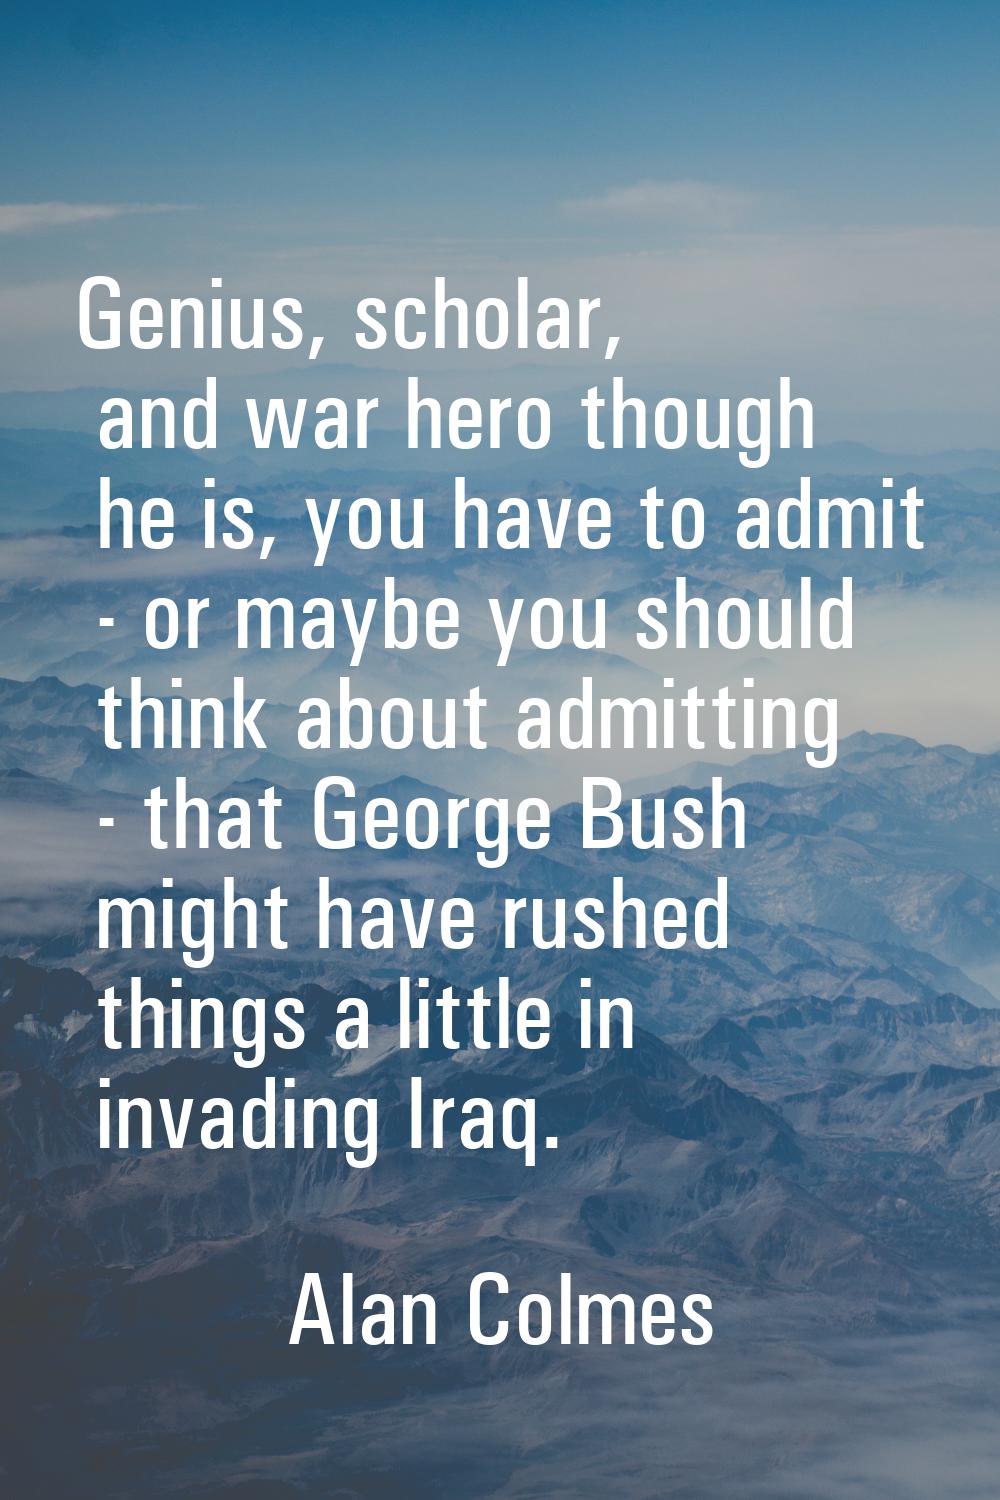 Genius, scholar, and war hero though he is, you have to admit - or maybe you should think about adm